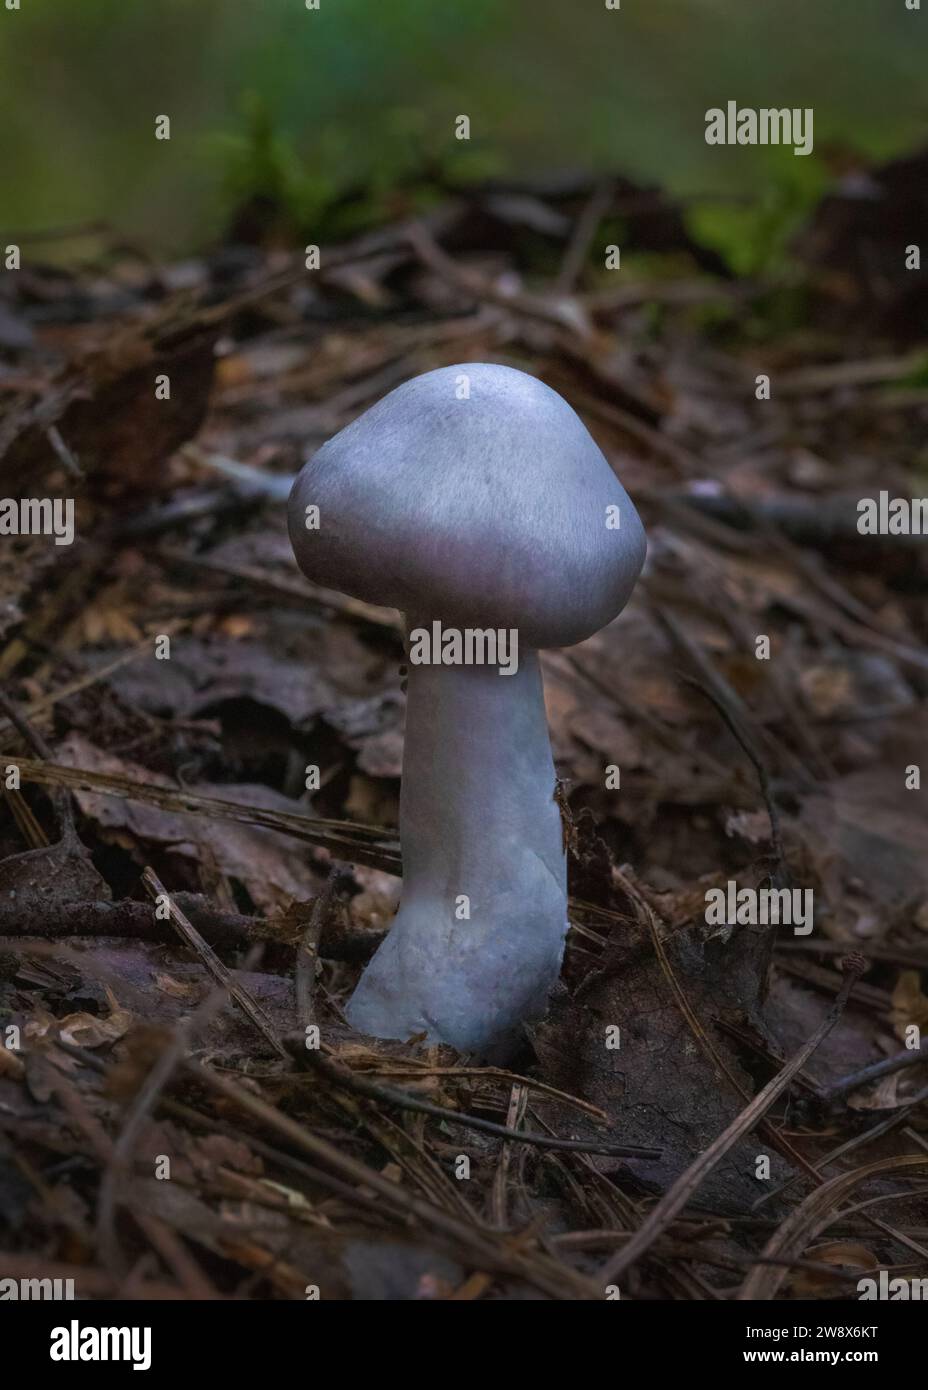 Violet Pearly webcap mushroom growing in leaf litter on forest floor Stock Photo